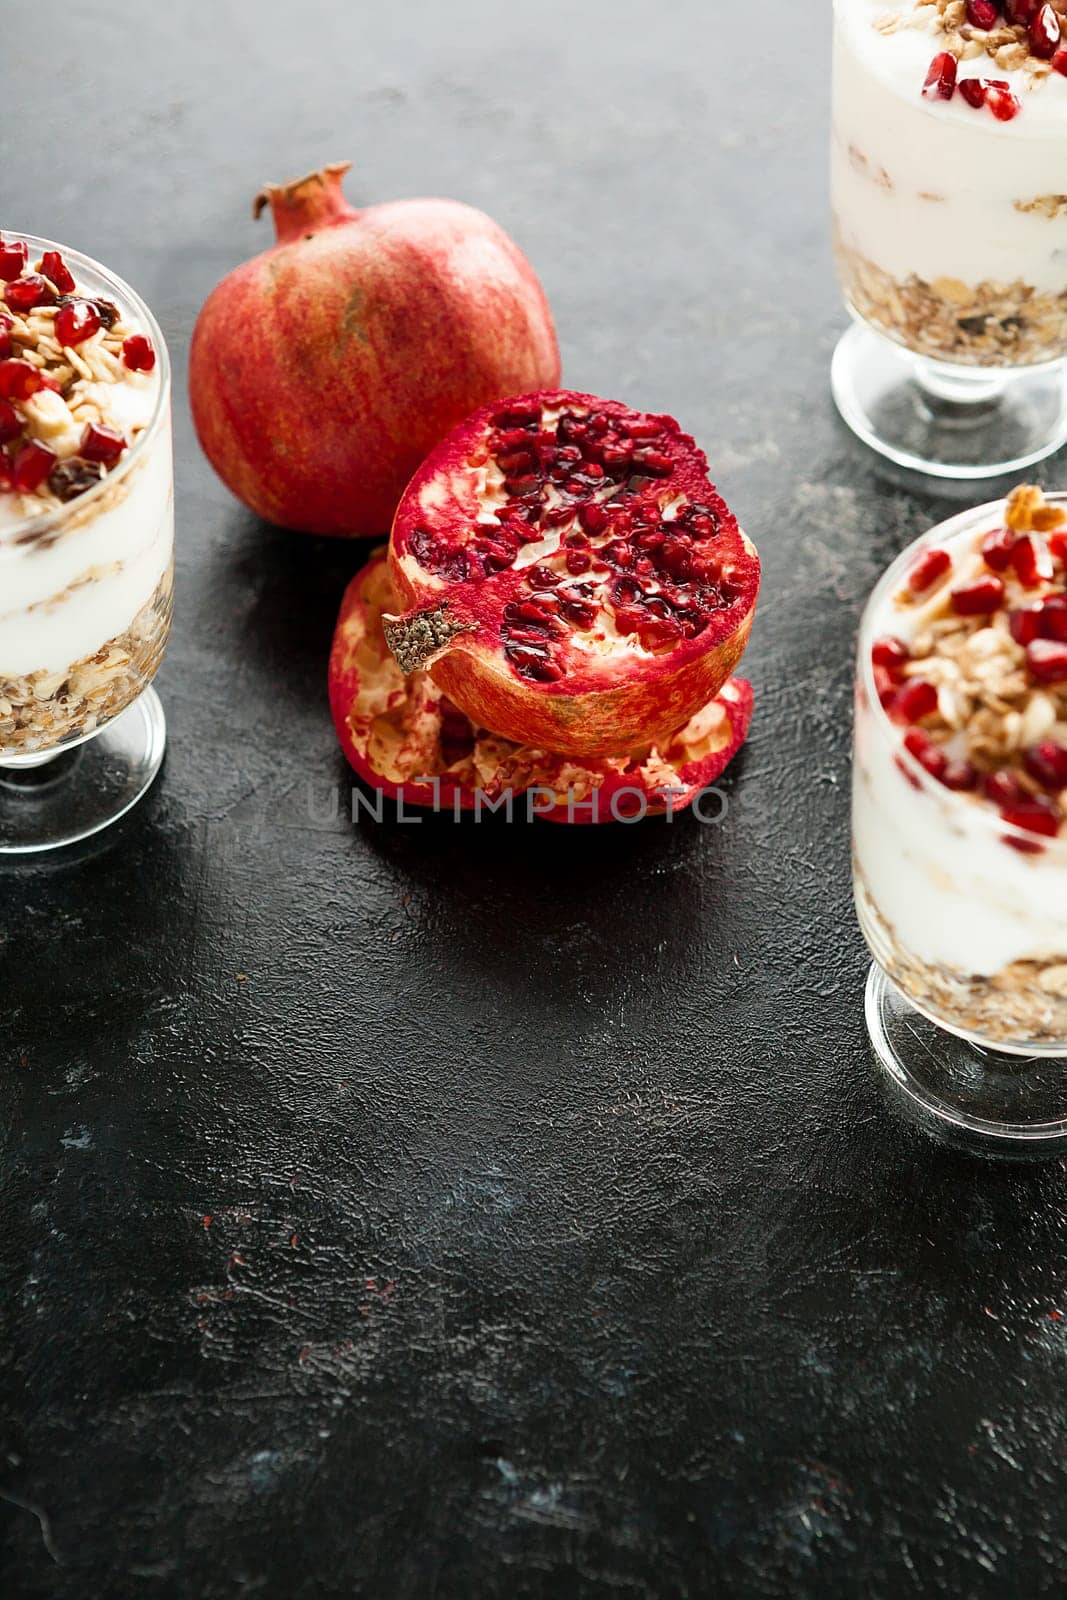 Pomegranate in the middle of home made desset on dark wooden background